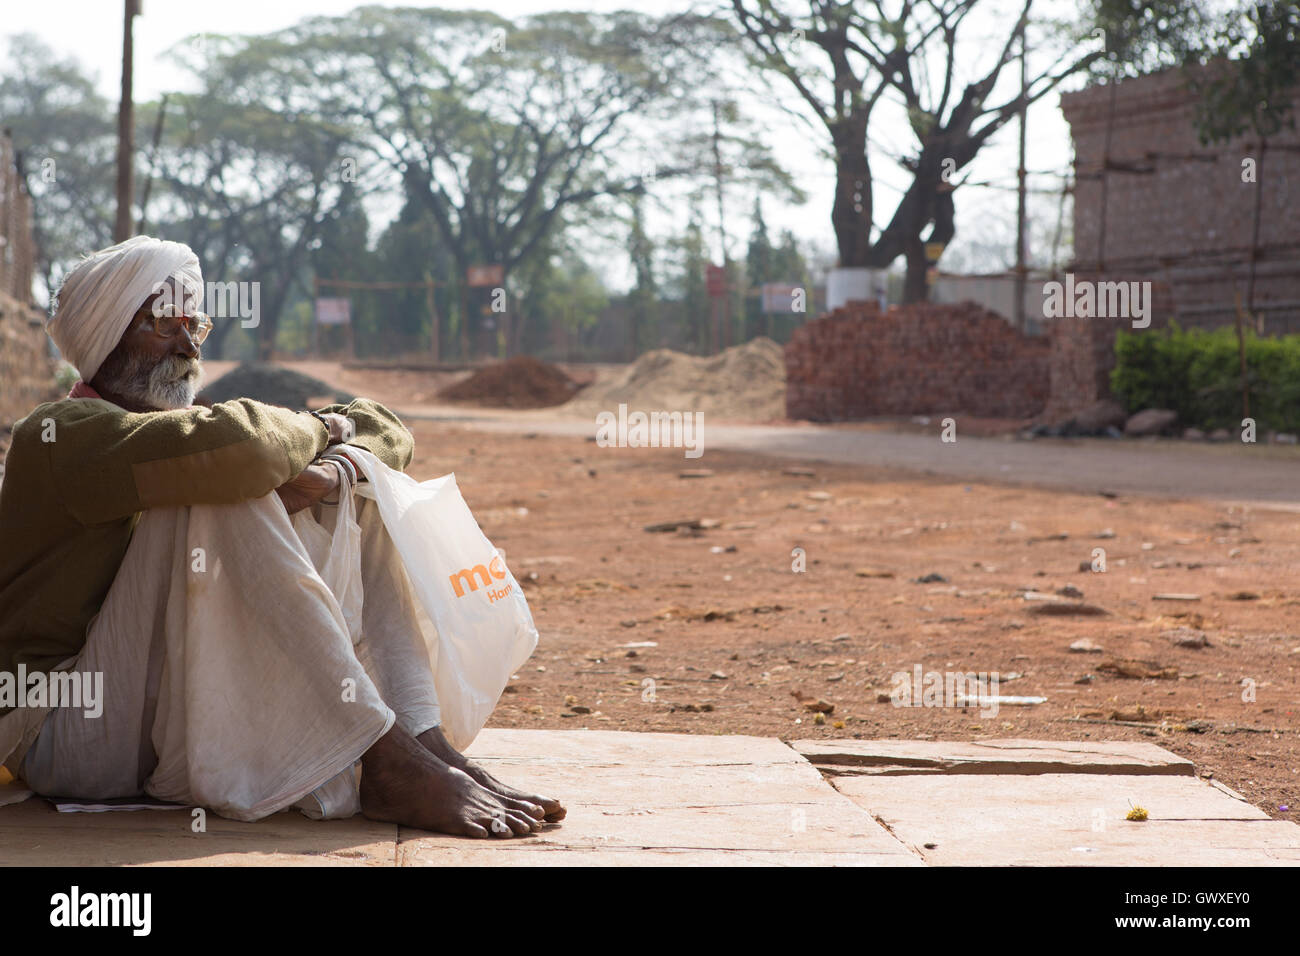 Old Indian man immersed in thoughts Stock Photo